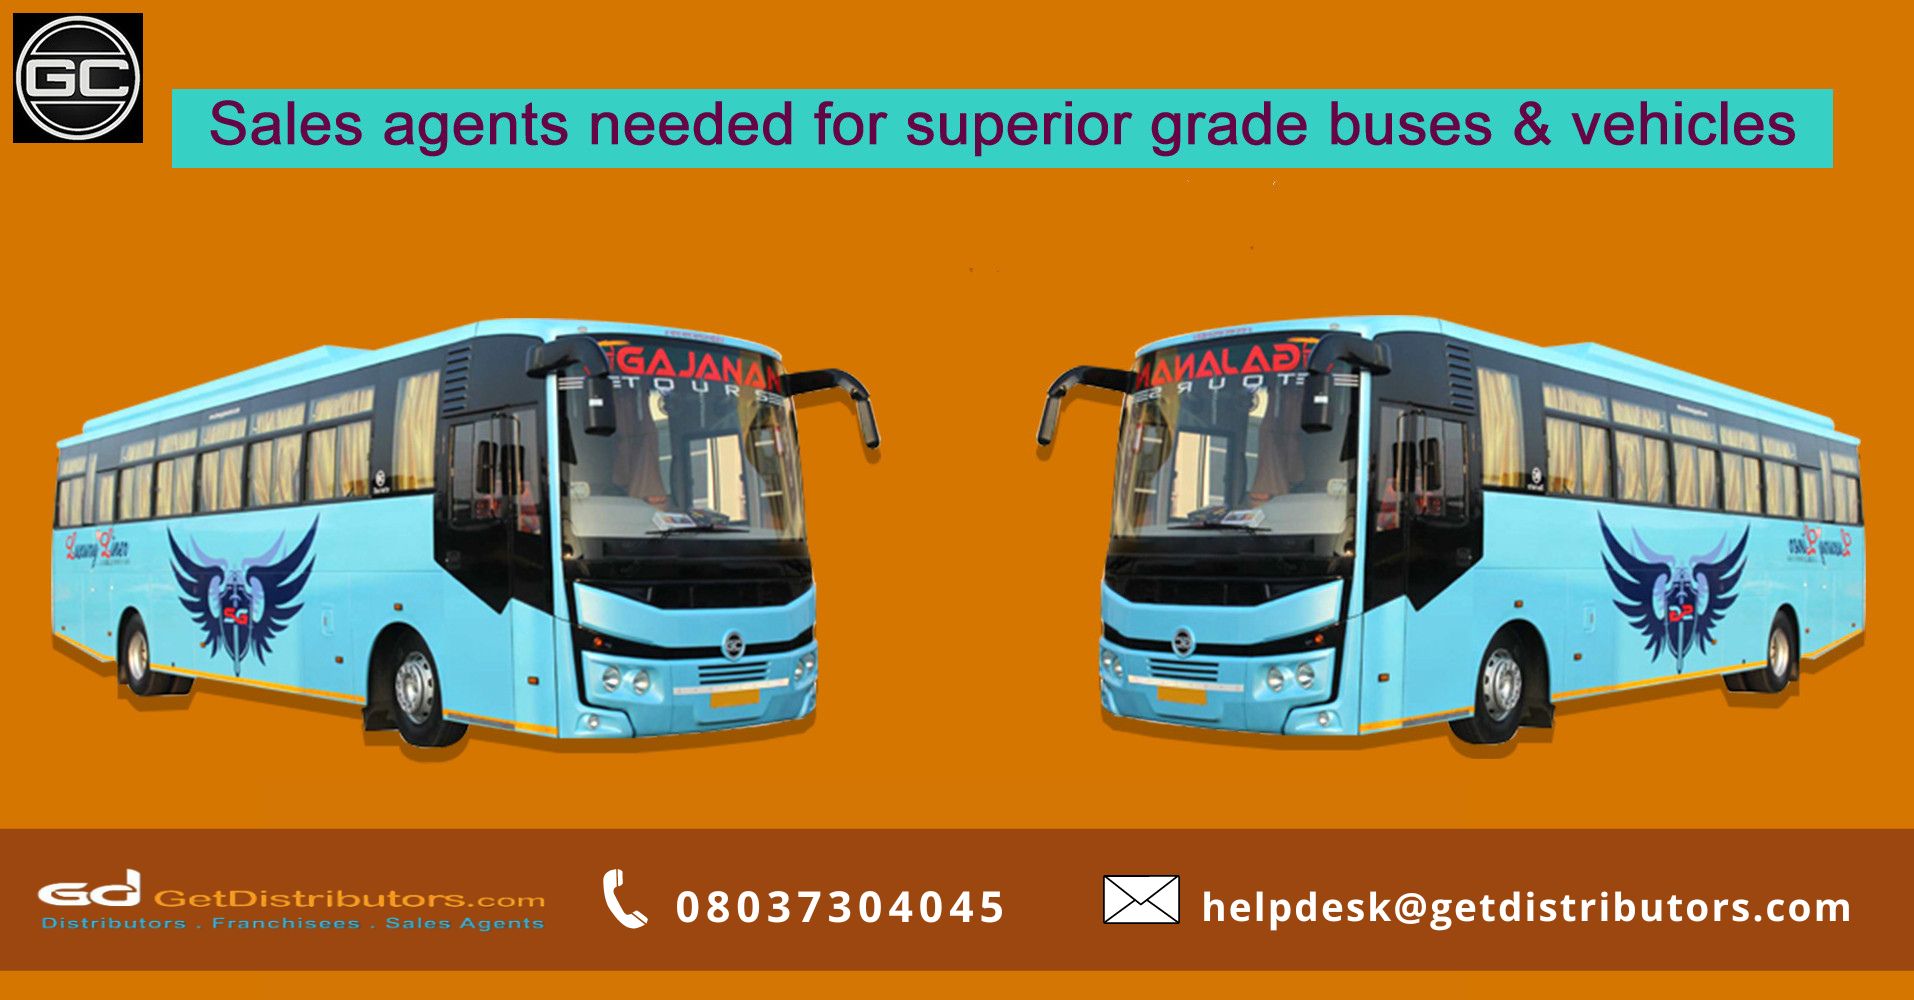 Sales agents needed for superior grade buses & vehicles